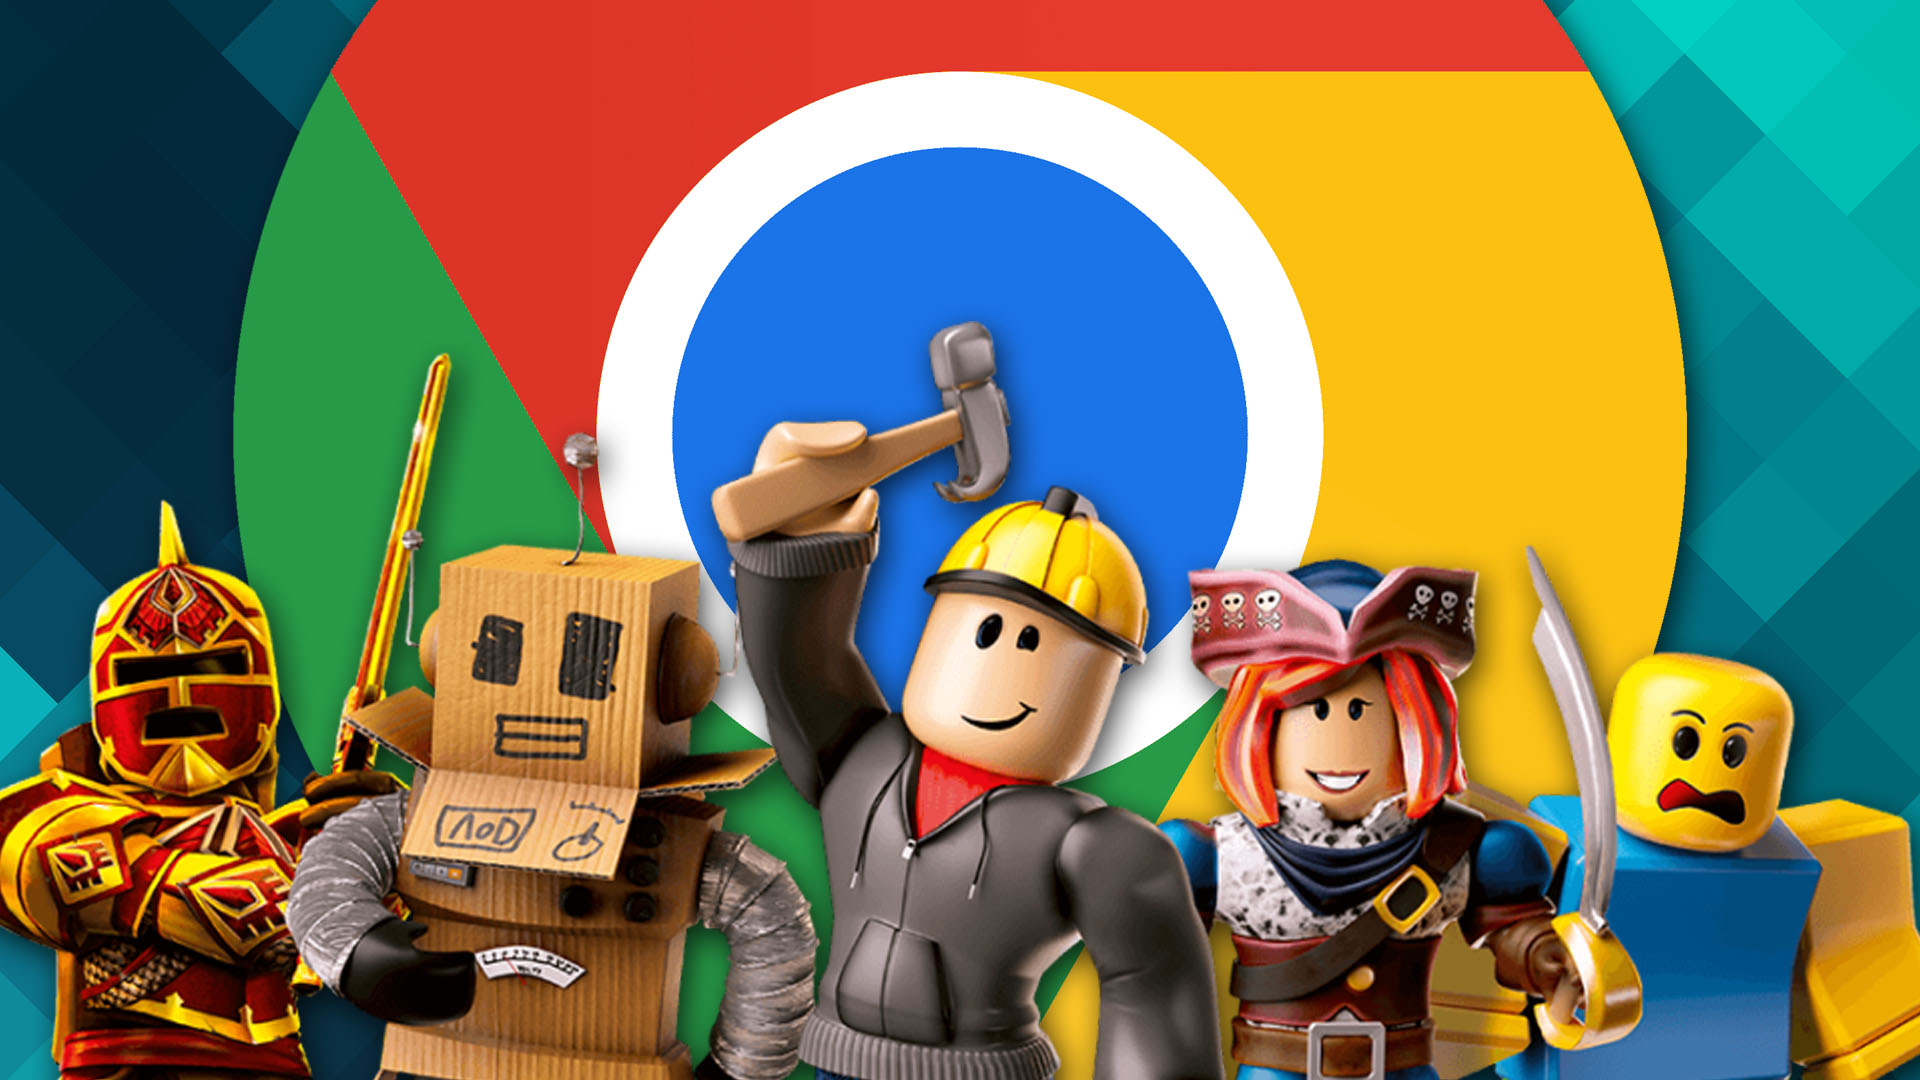 Roblox characters in front of Chrome logo